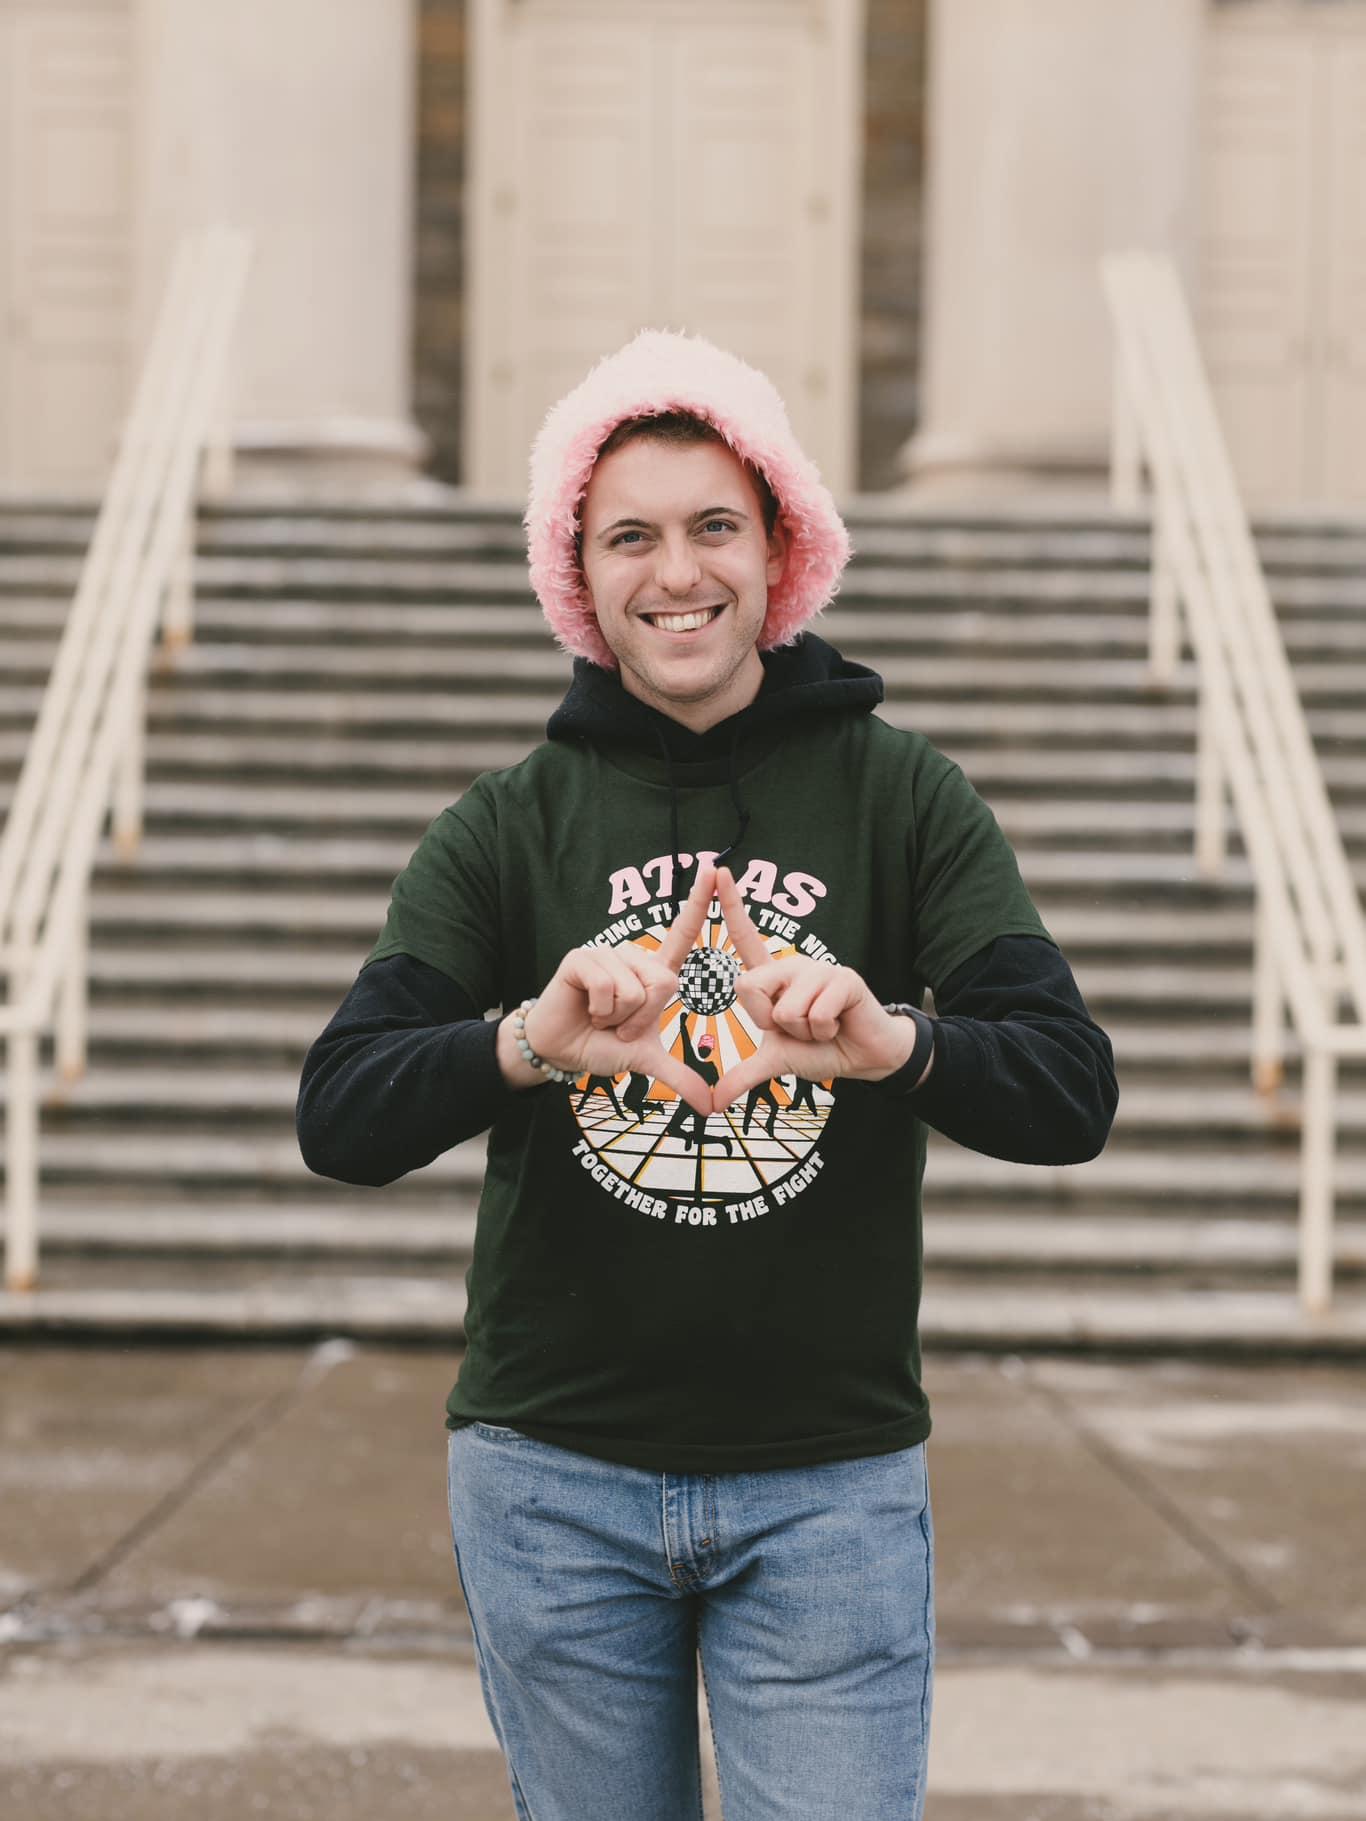 Young man with a pink, fuzzy hat standing in front of Old Main